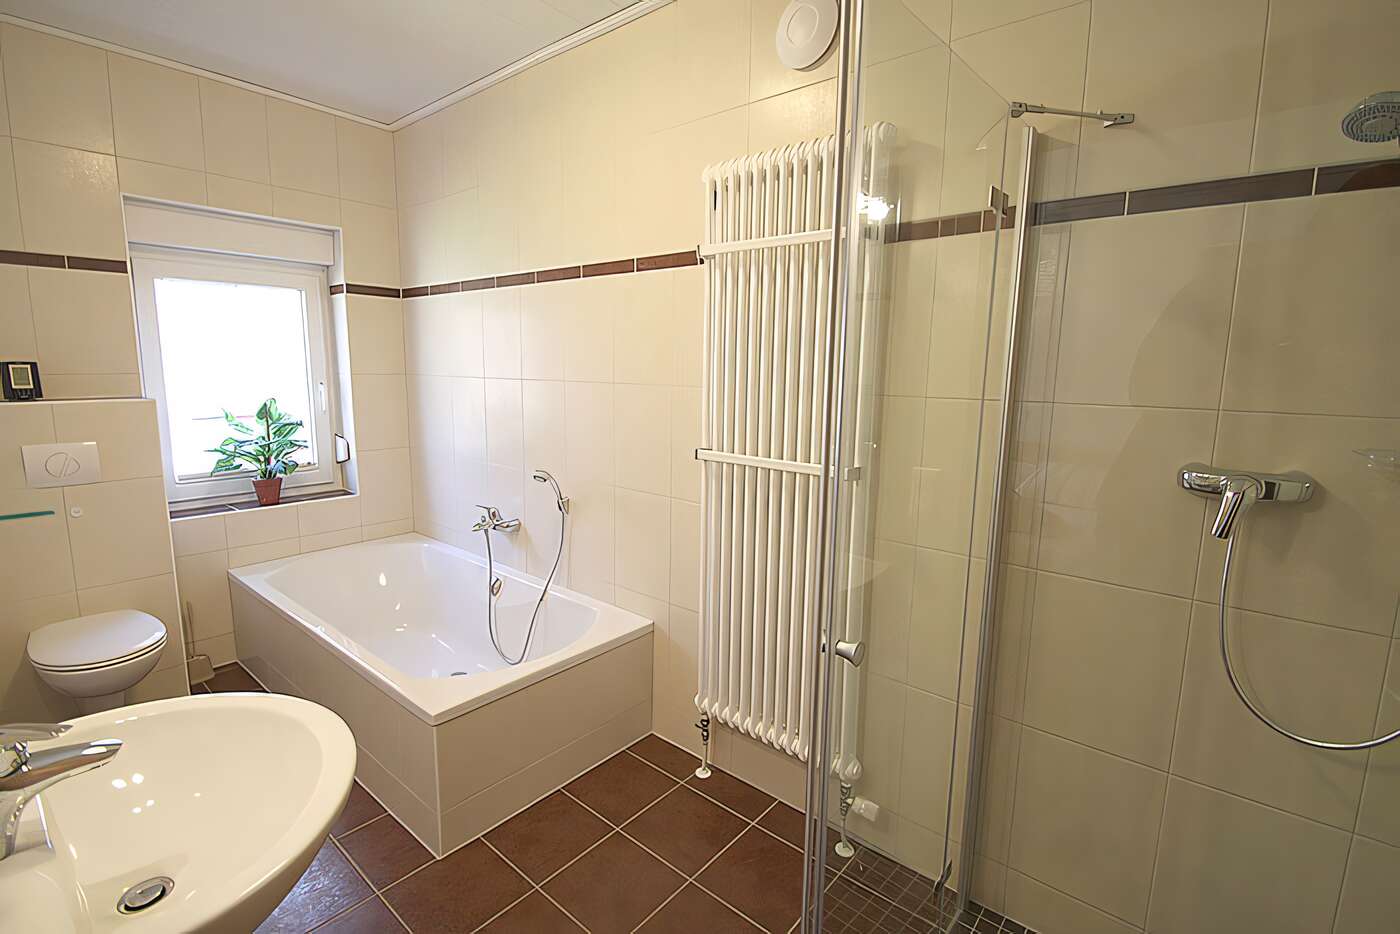 Second bath room in apartment No.2, with shower and bathtub